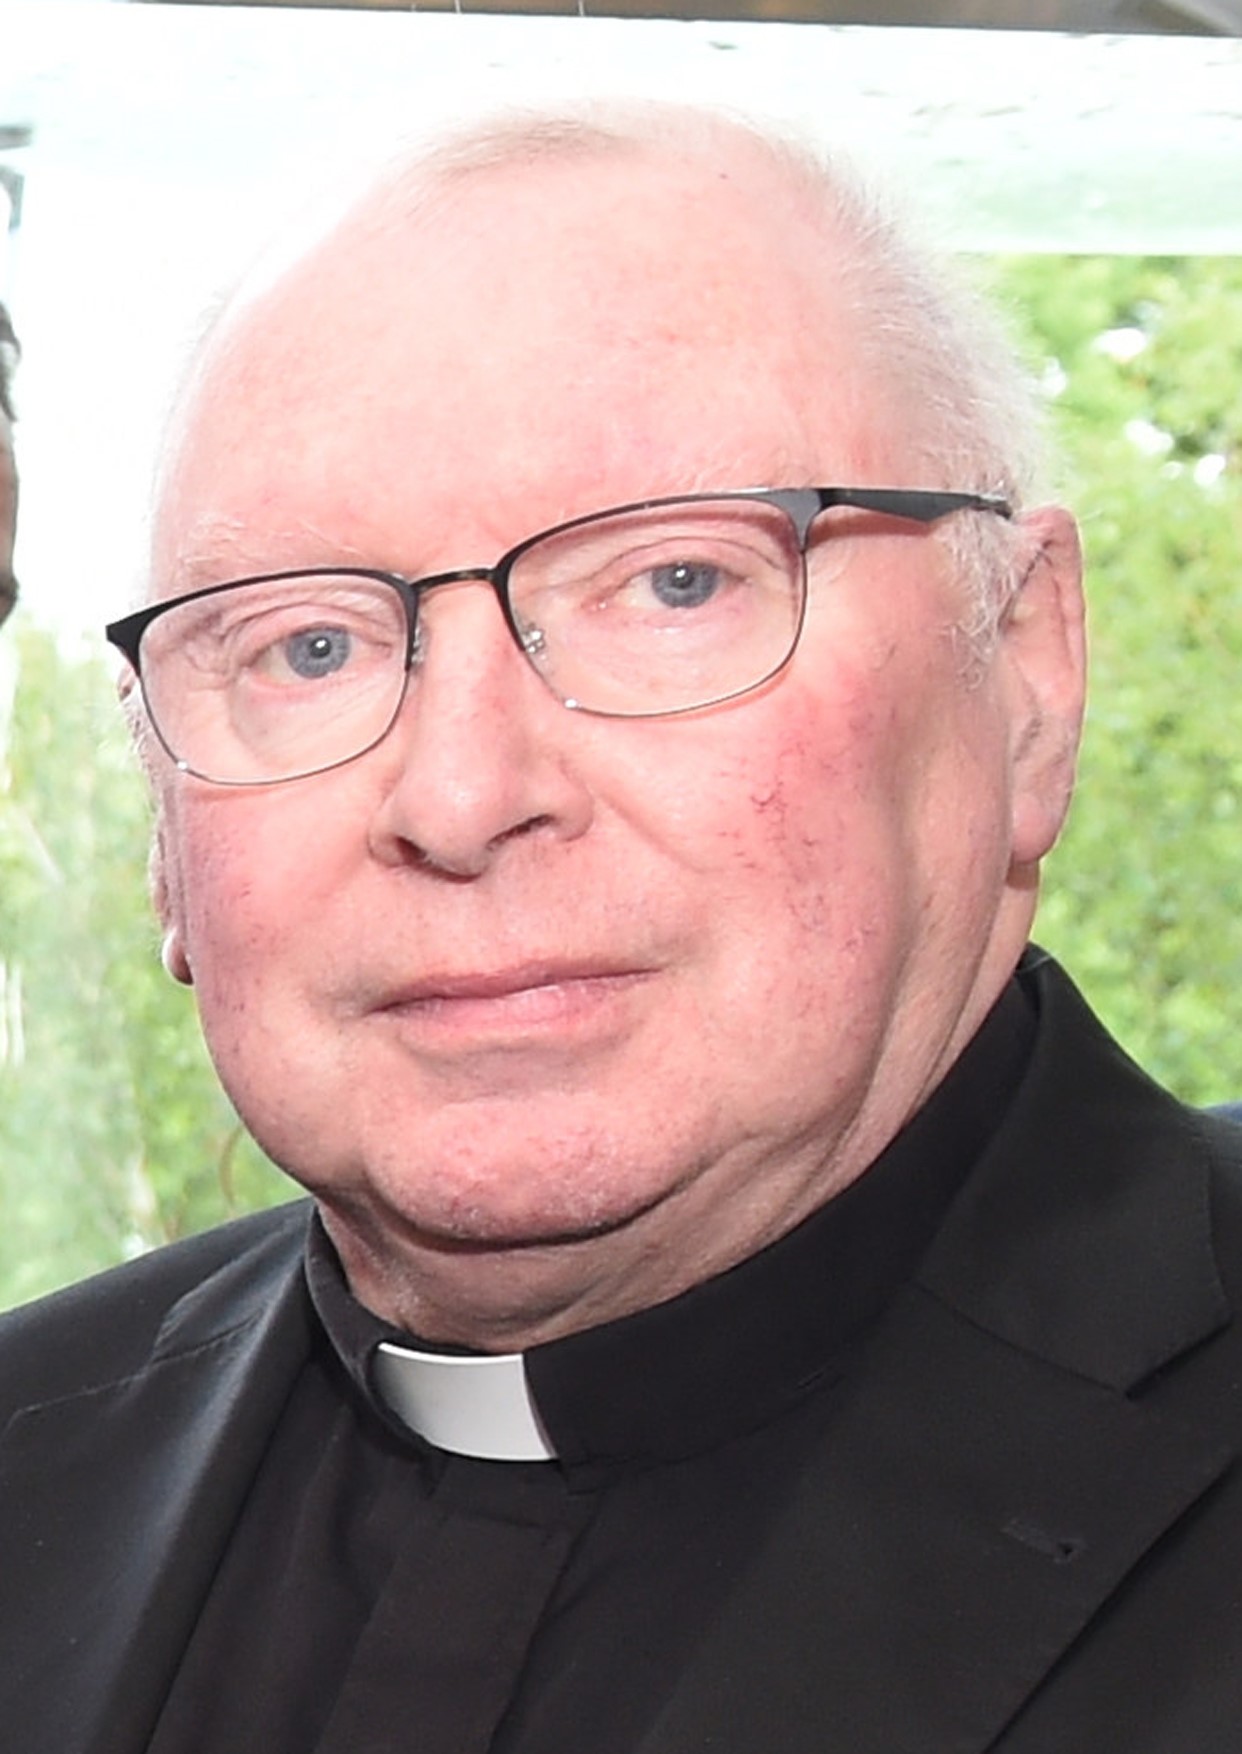 Dromore priest pleads not guilty to historic sexual offences